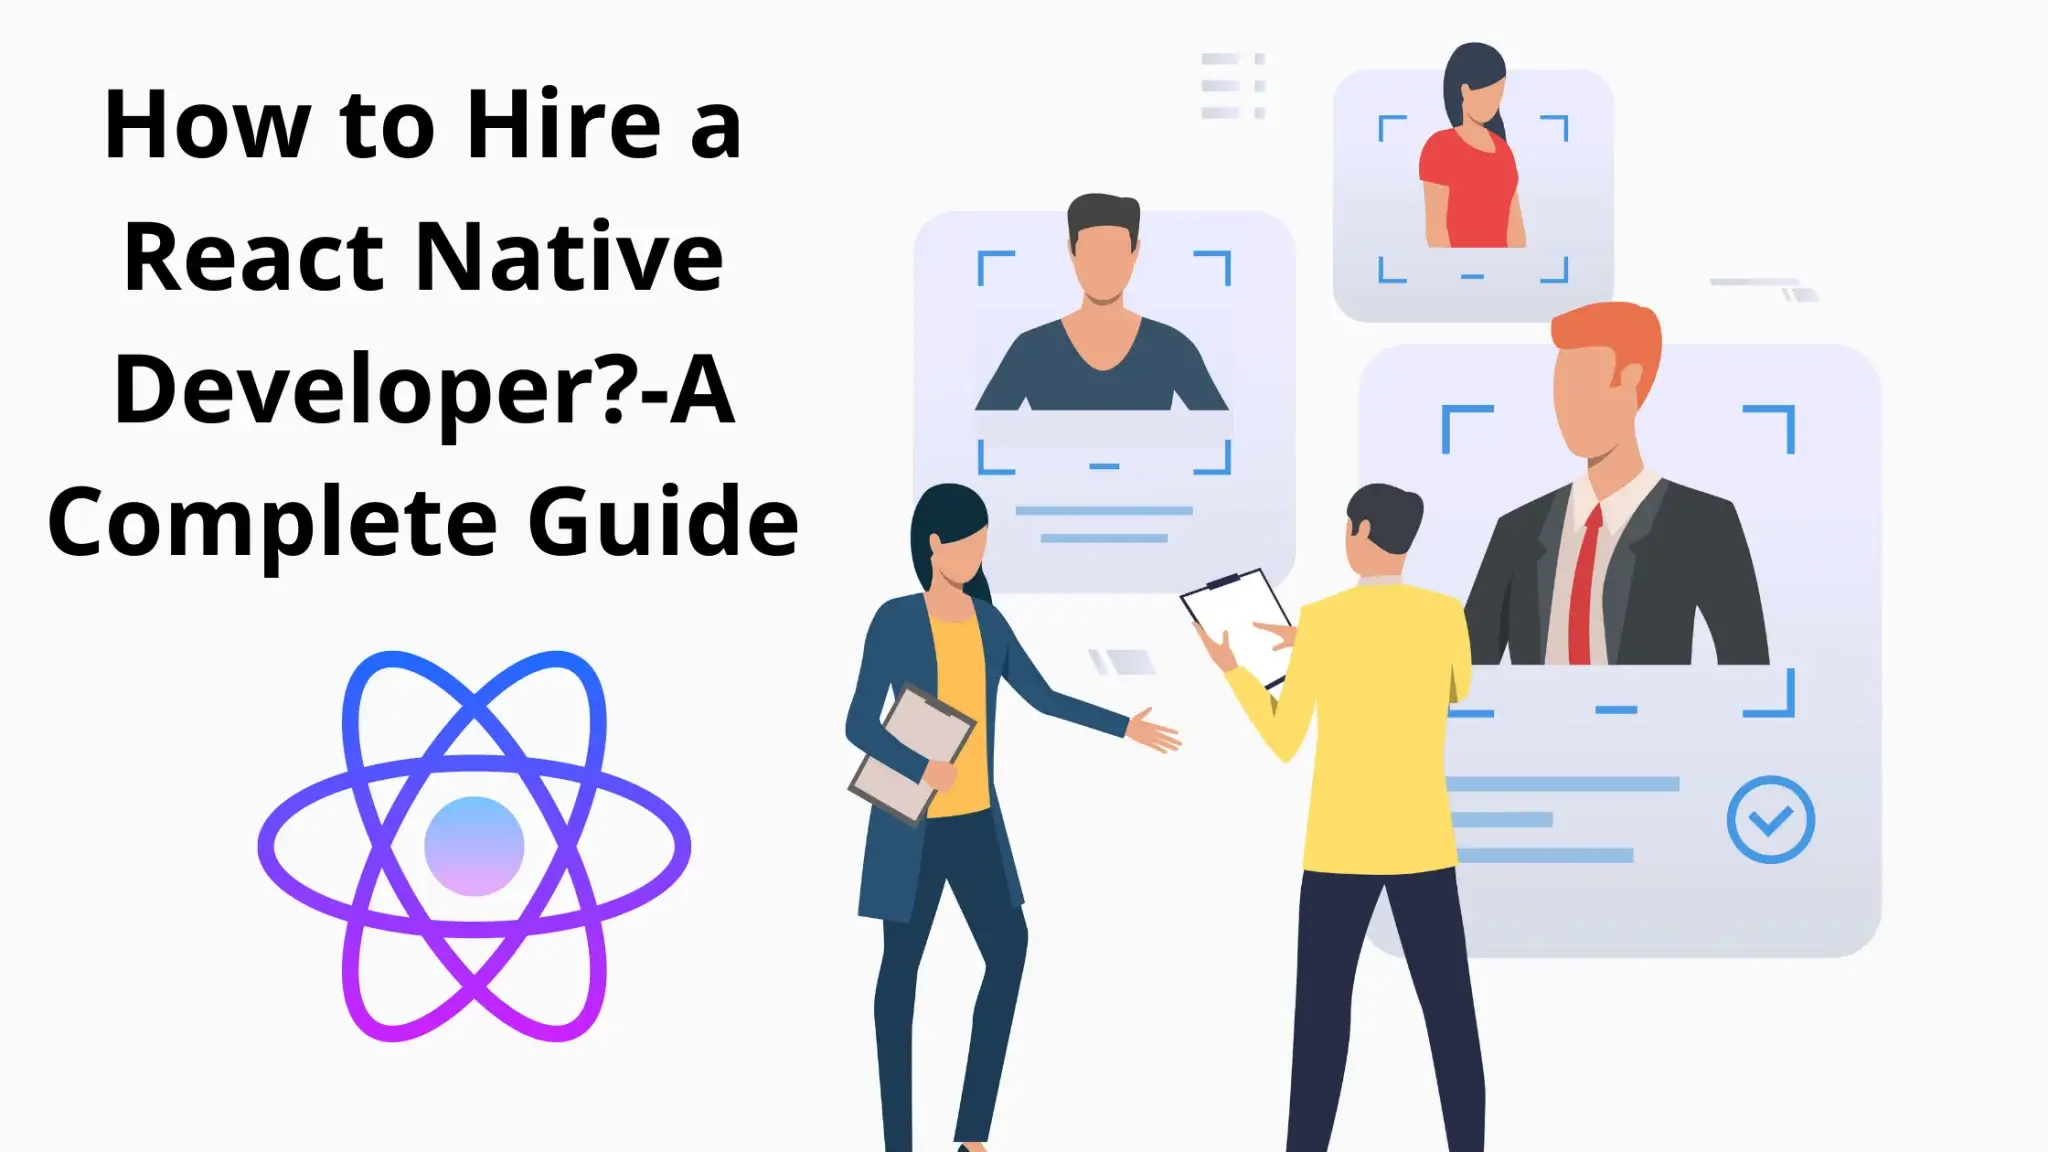 How-to-Hire-a-React-Native-Developer-A-Complete-Guide-2048x1152-1